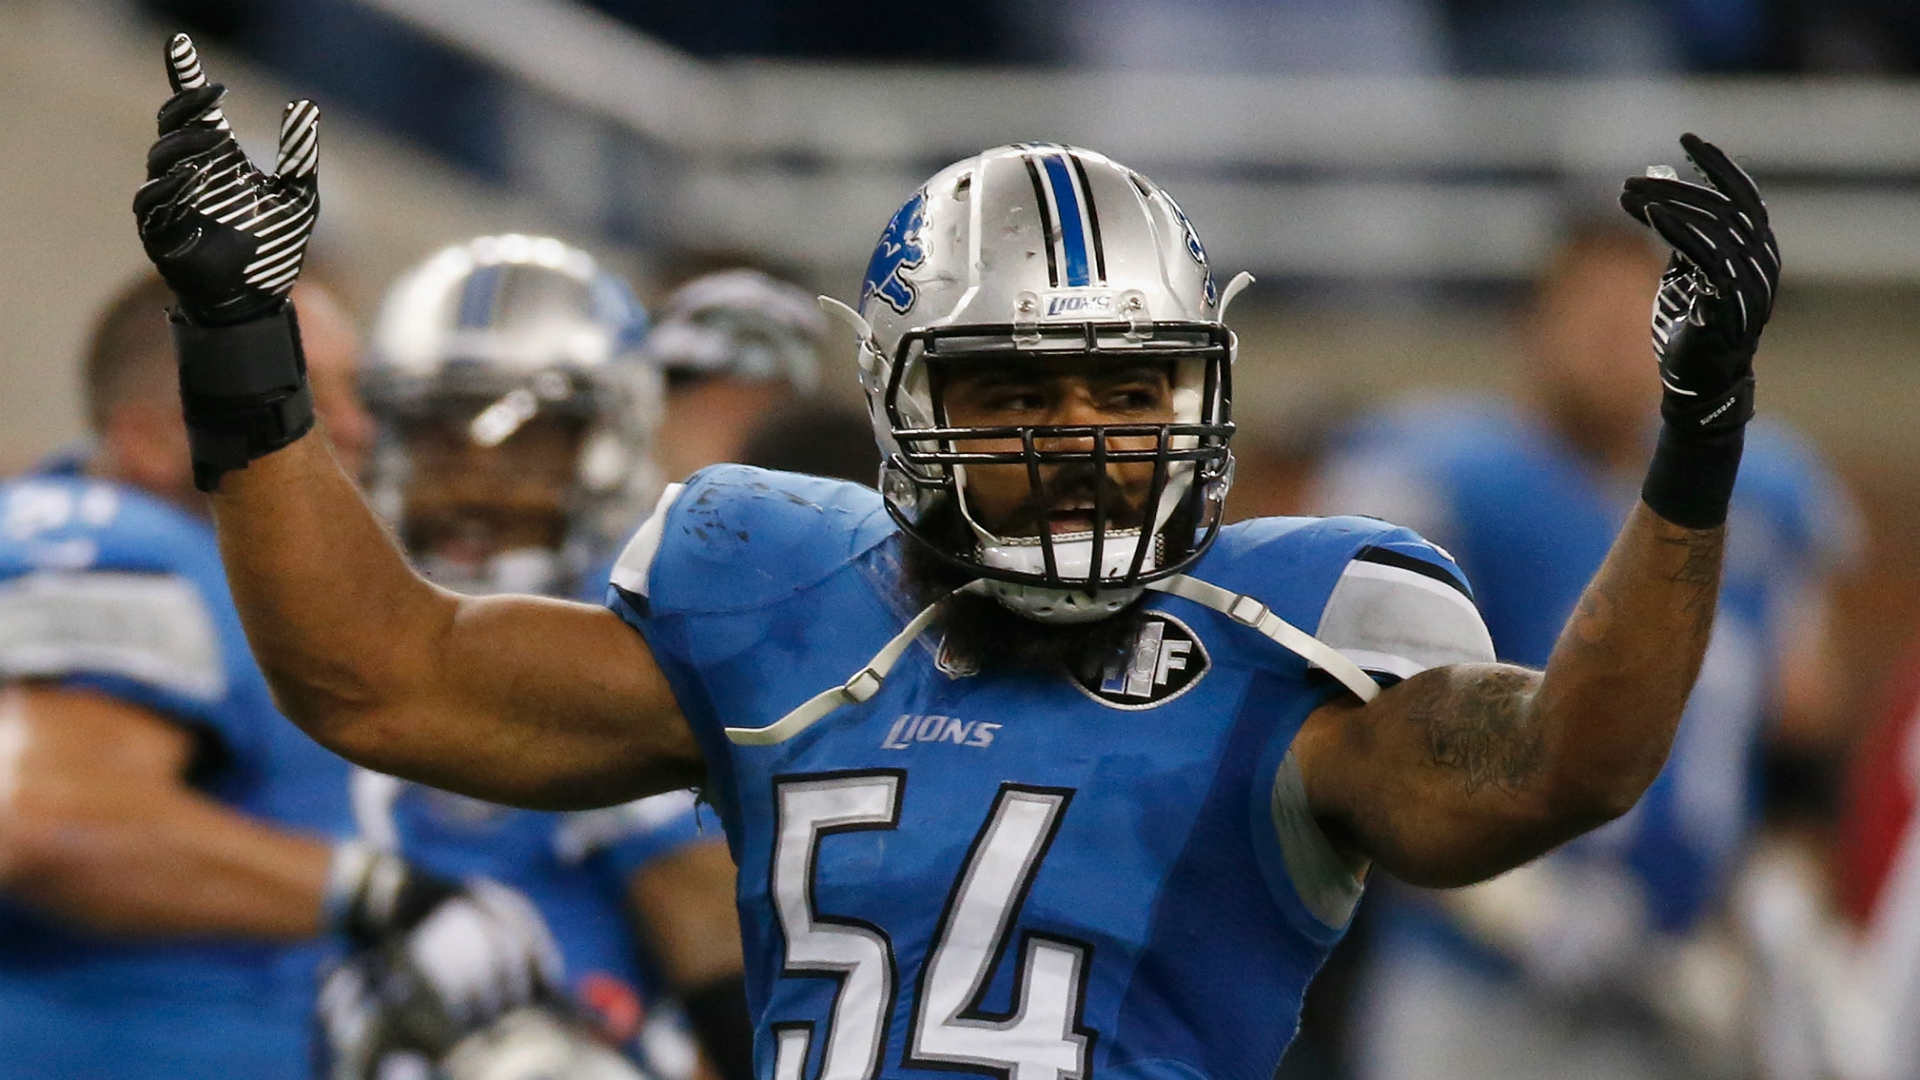 Former LB DeAndre Levy testifies Lions implored him not to talk about brain injuries